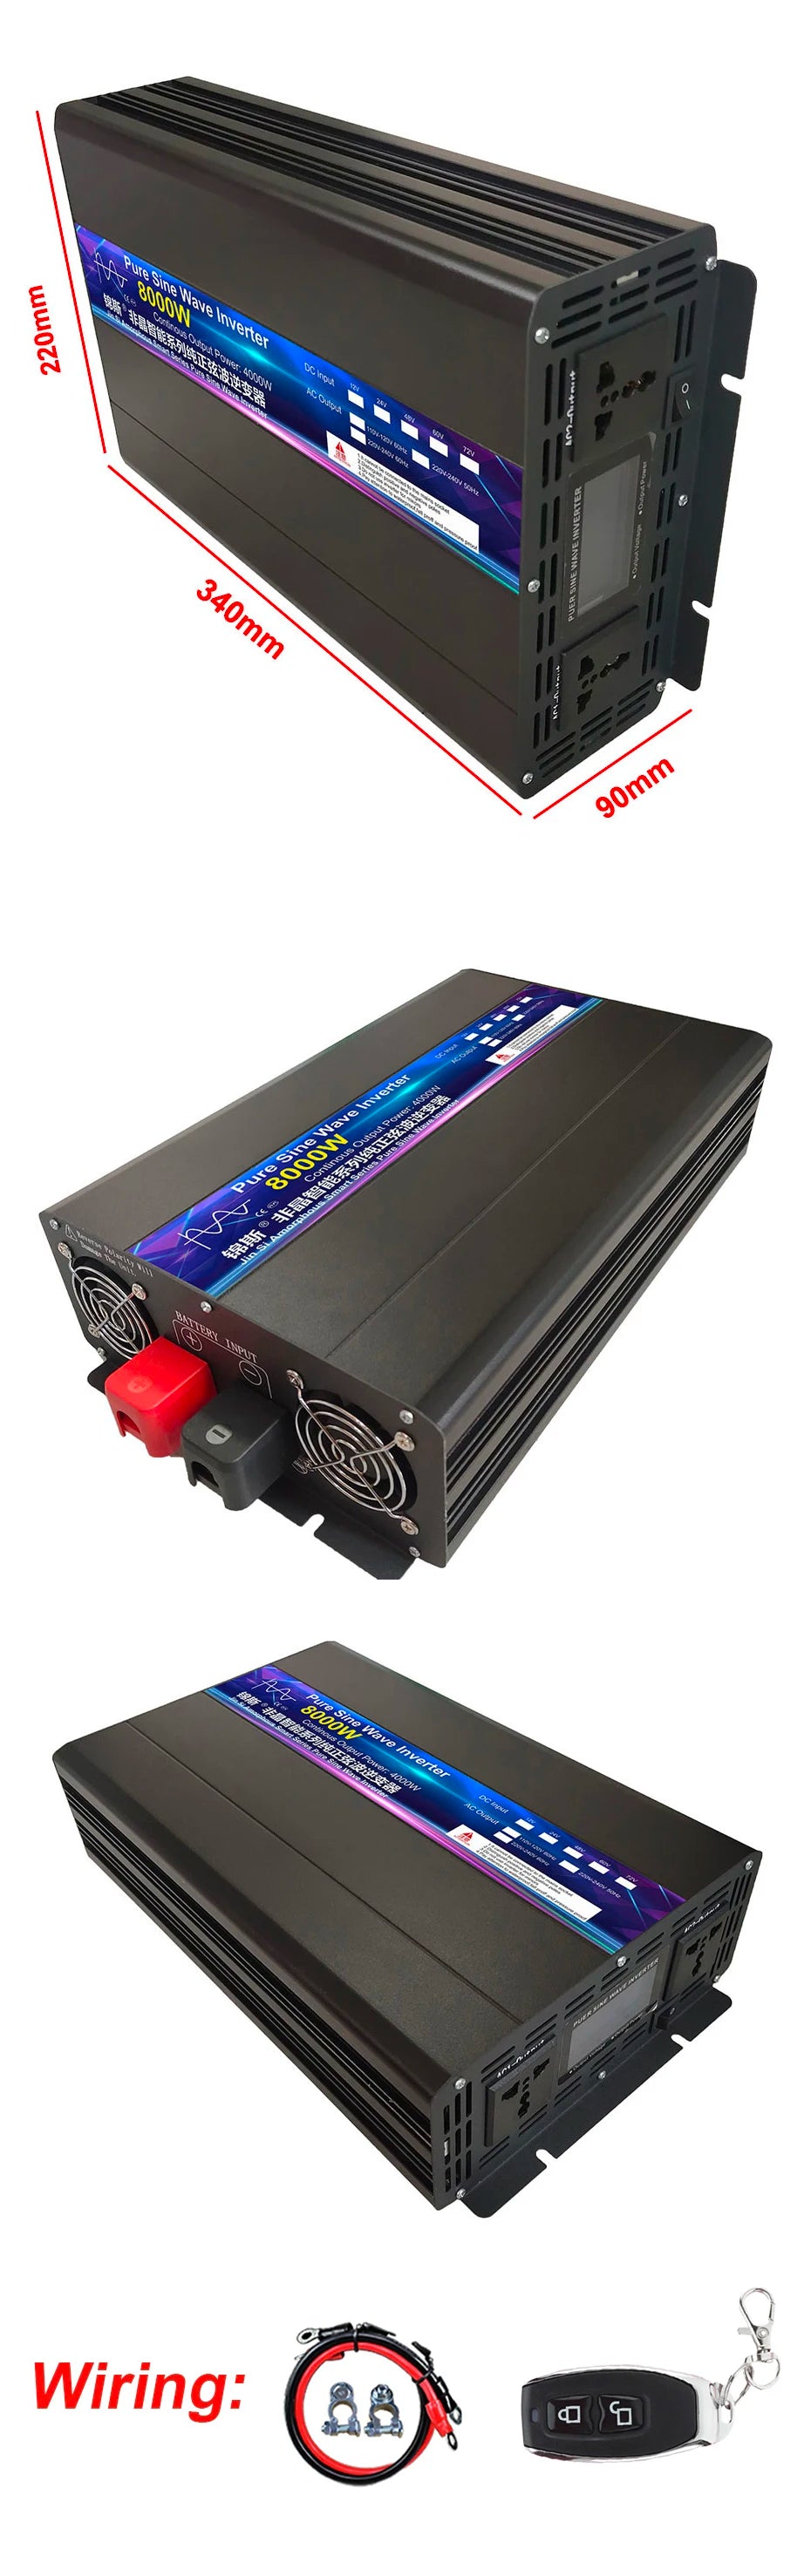 Inverter converts DC power to AC power with pure sine wave tech, suitable for household appliances, up to 12kW.